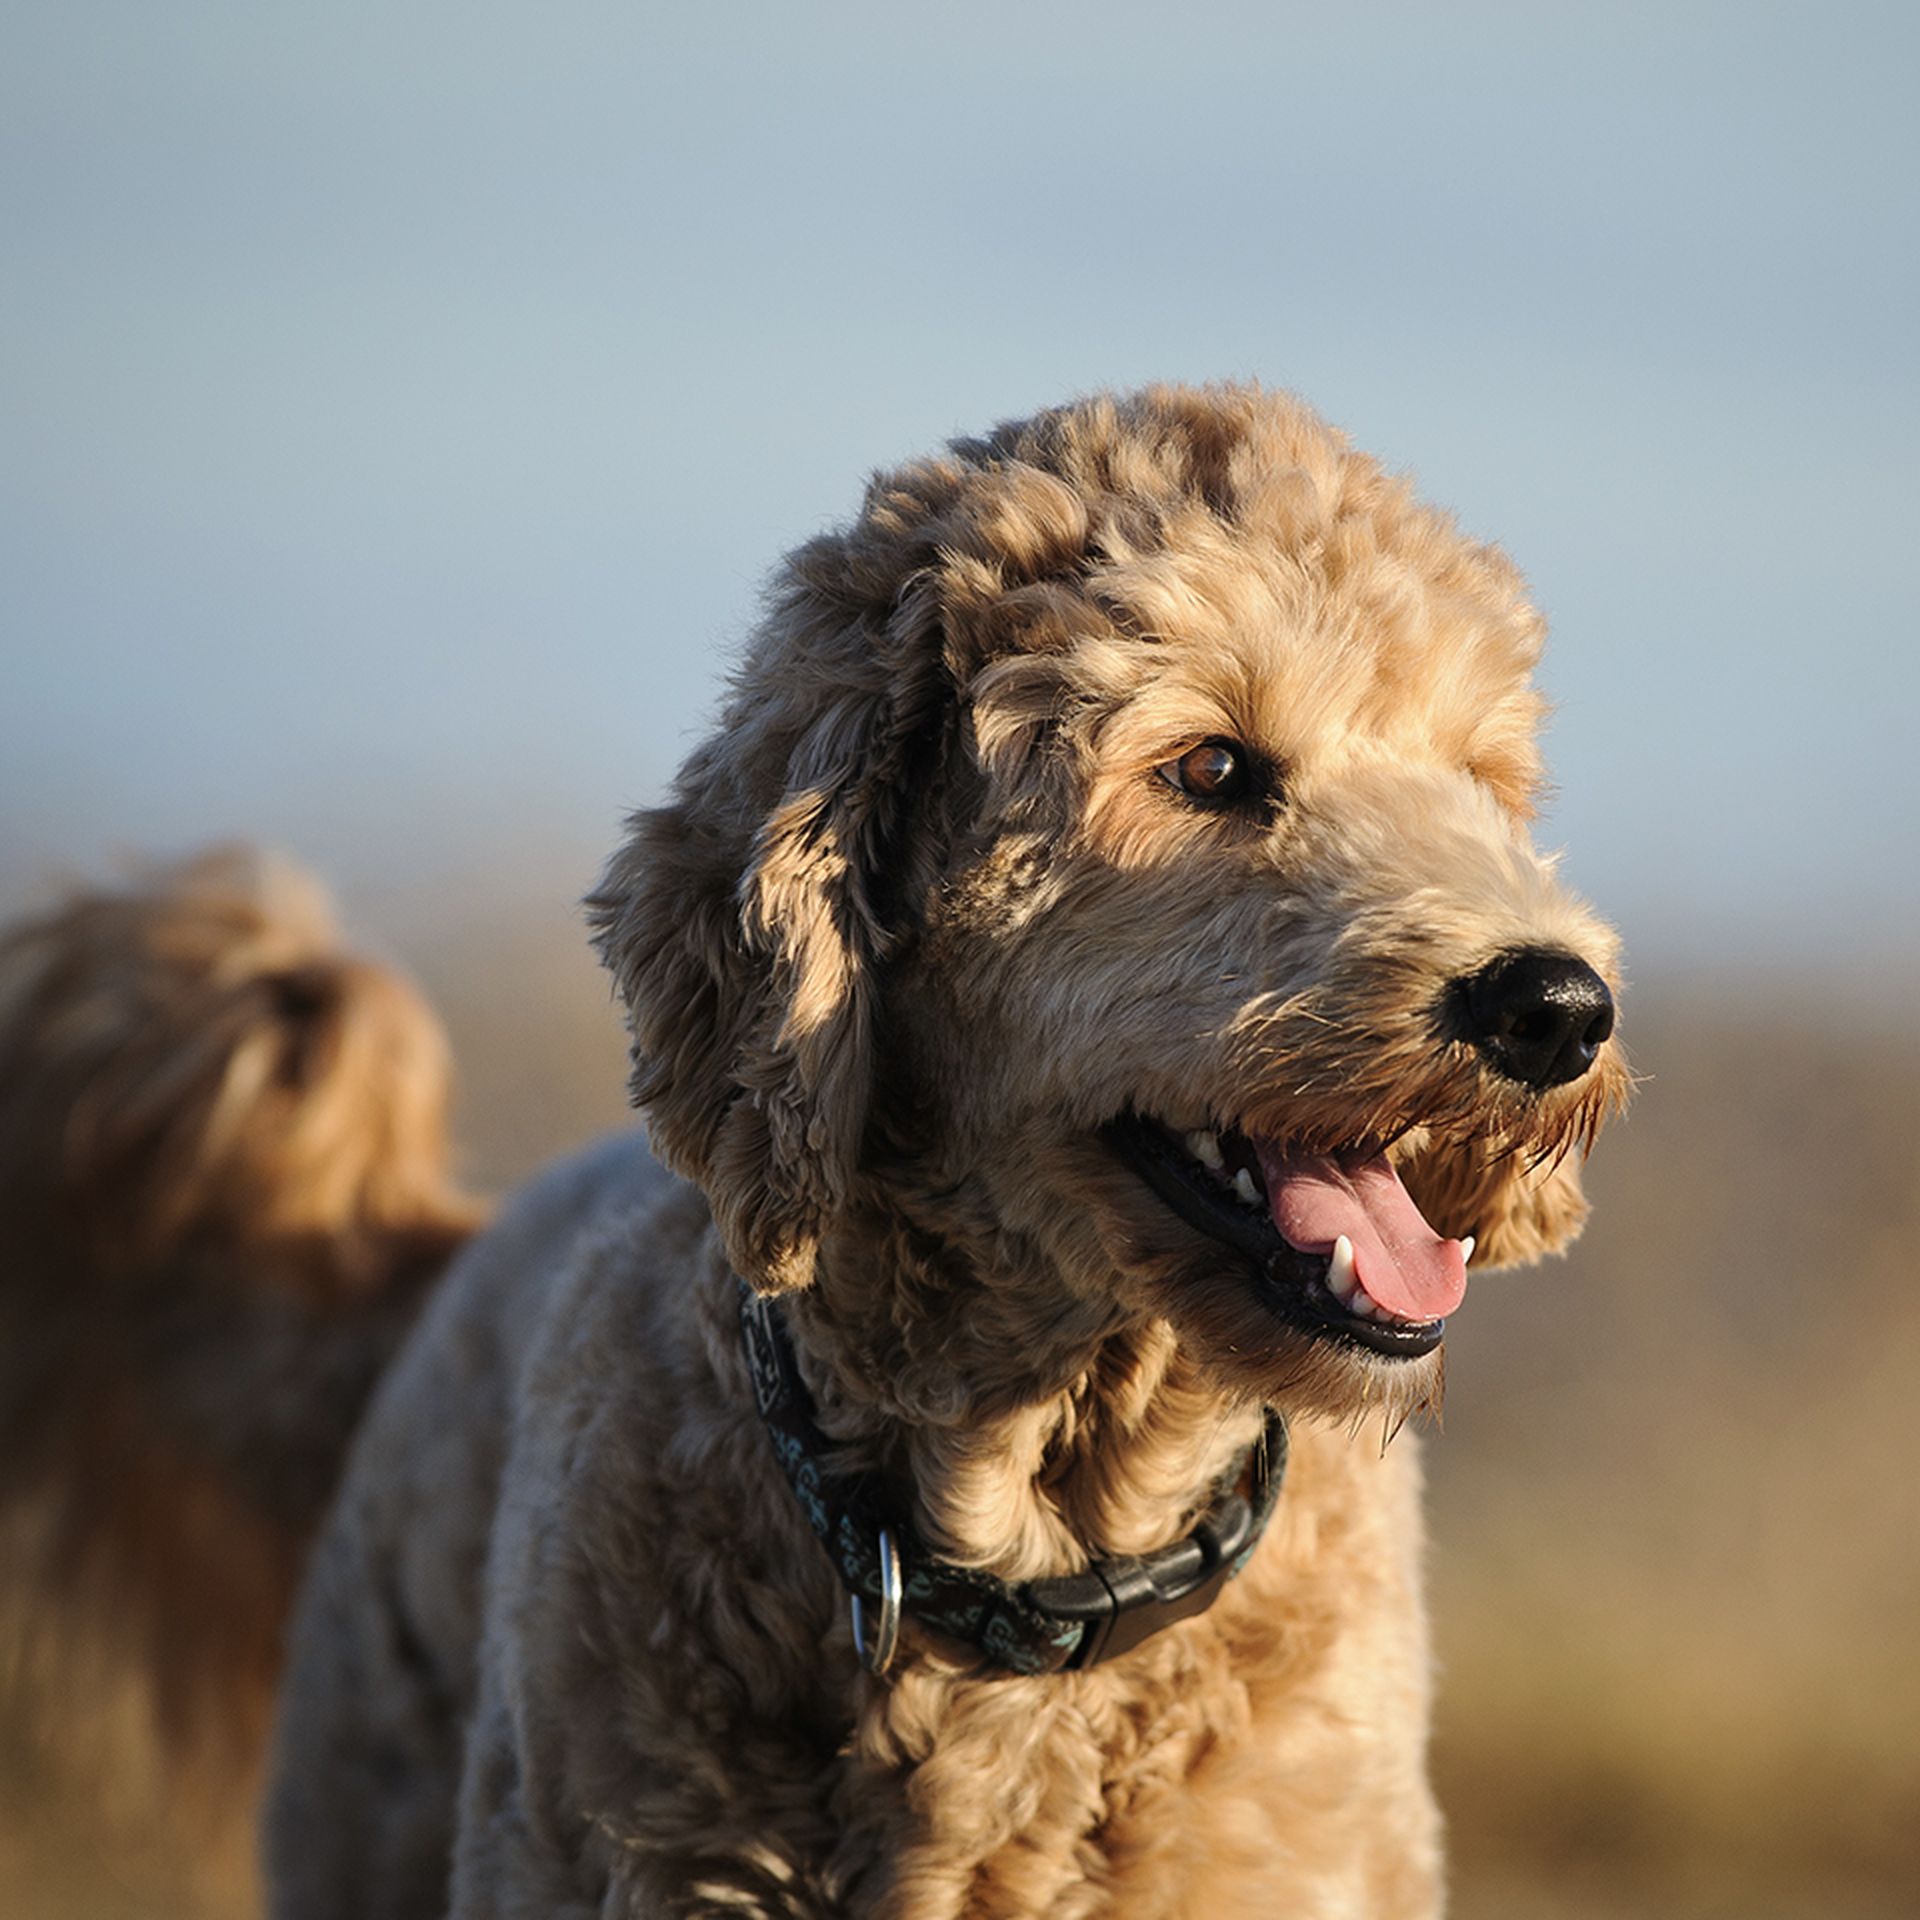 A happy goldendoodle looking towards the sun.